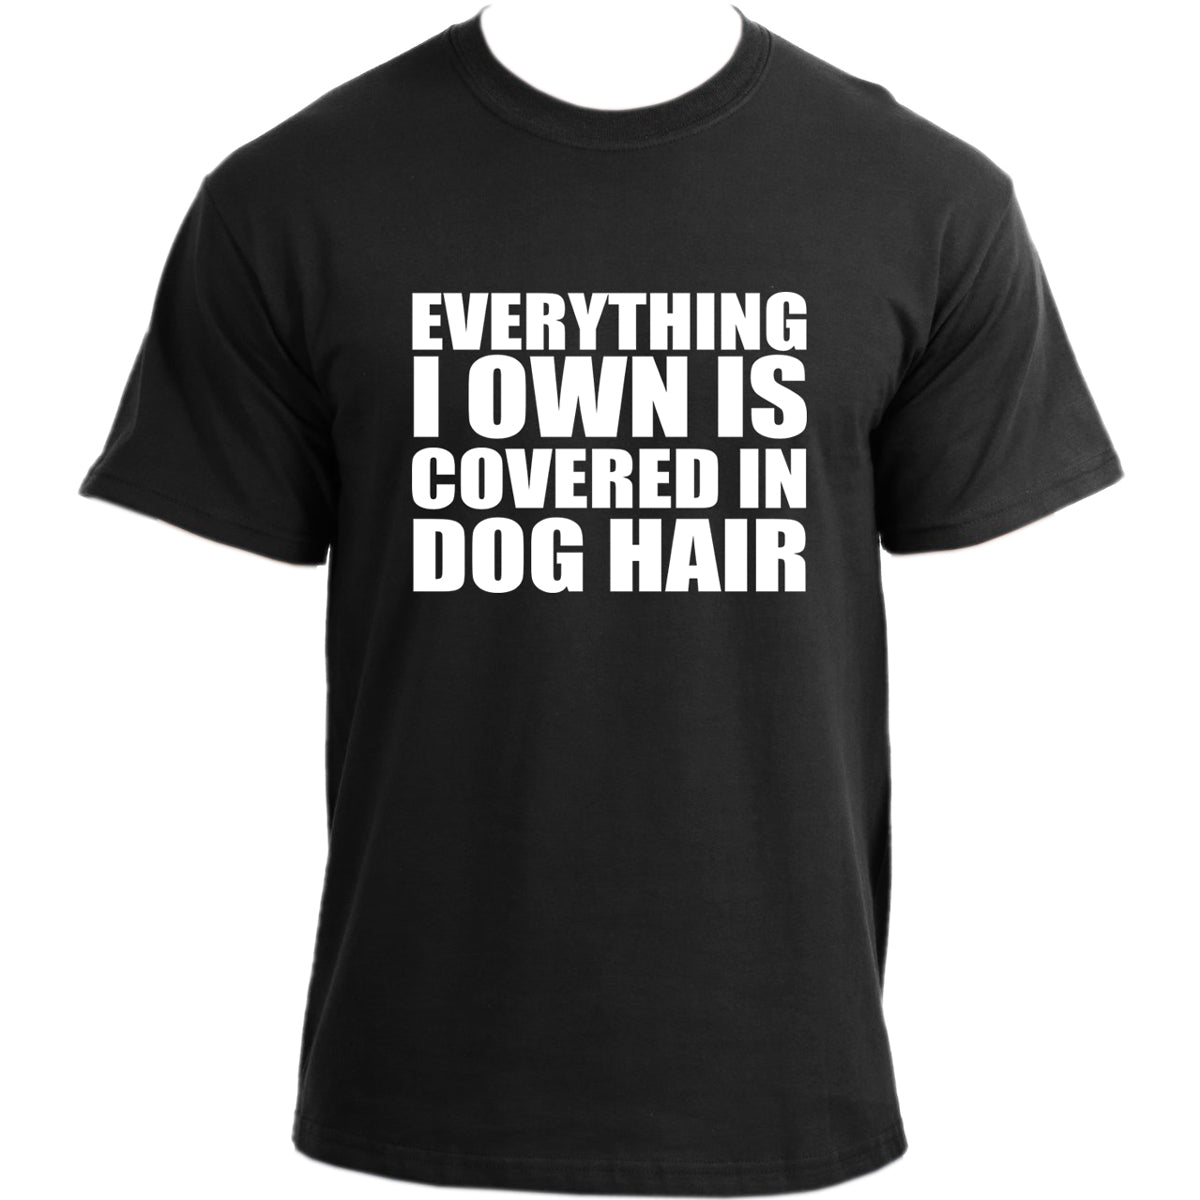 Everything I own is covered in dog hair T-shirt I Dog Owner TShirt I Dog Dad Funny T-shirts For Men